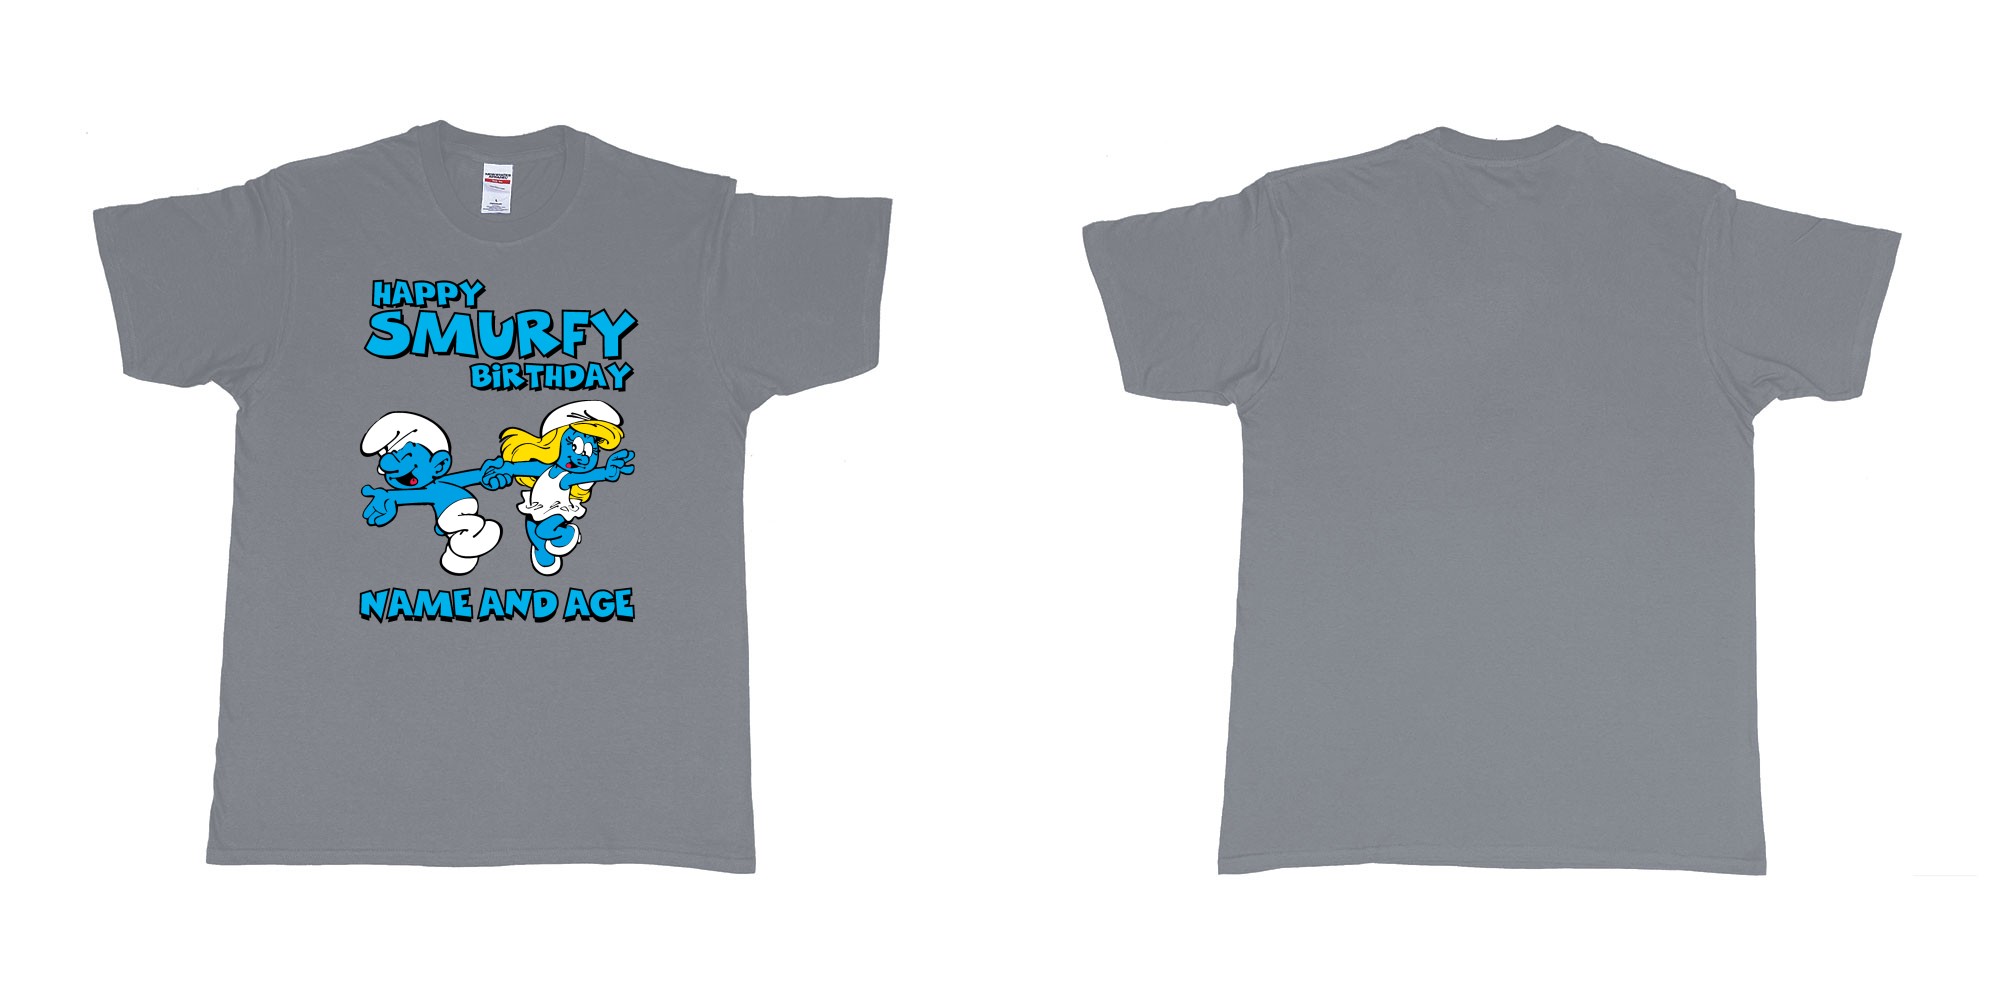 Custom tshirt design happy smurfy birthday in fabric color misty choice your own text made in Bali by The Pirate Way